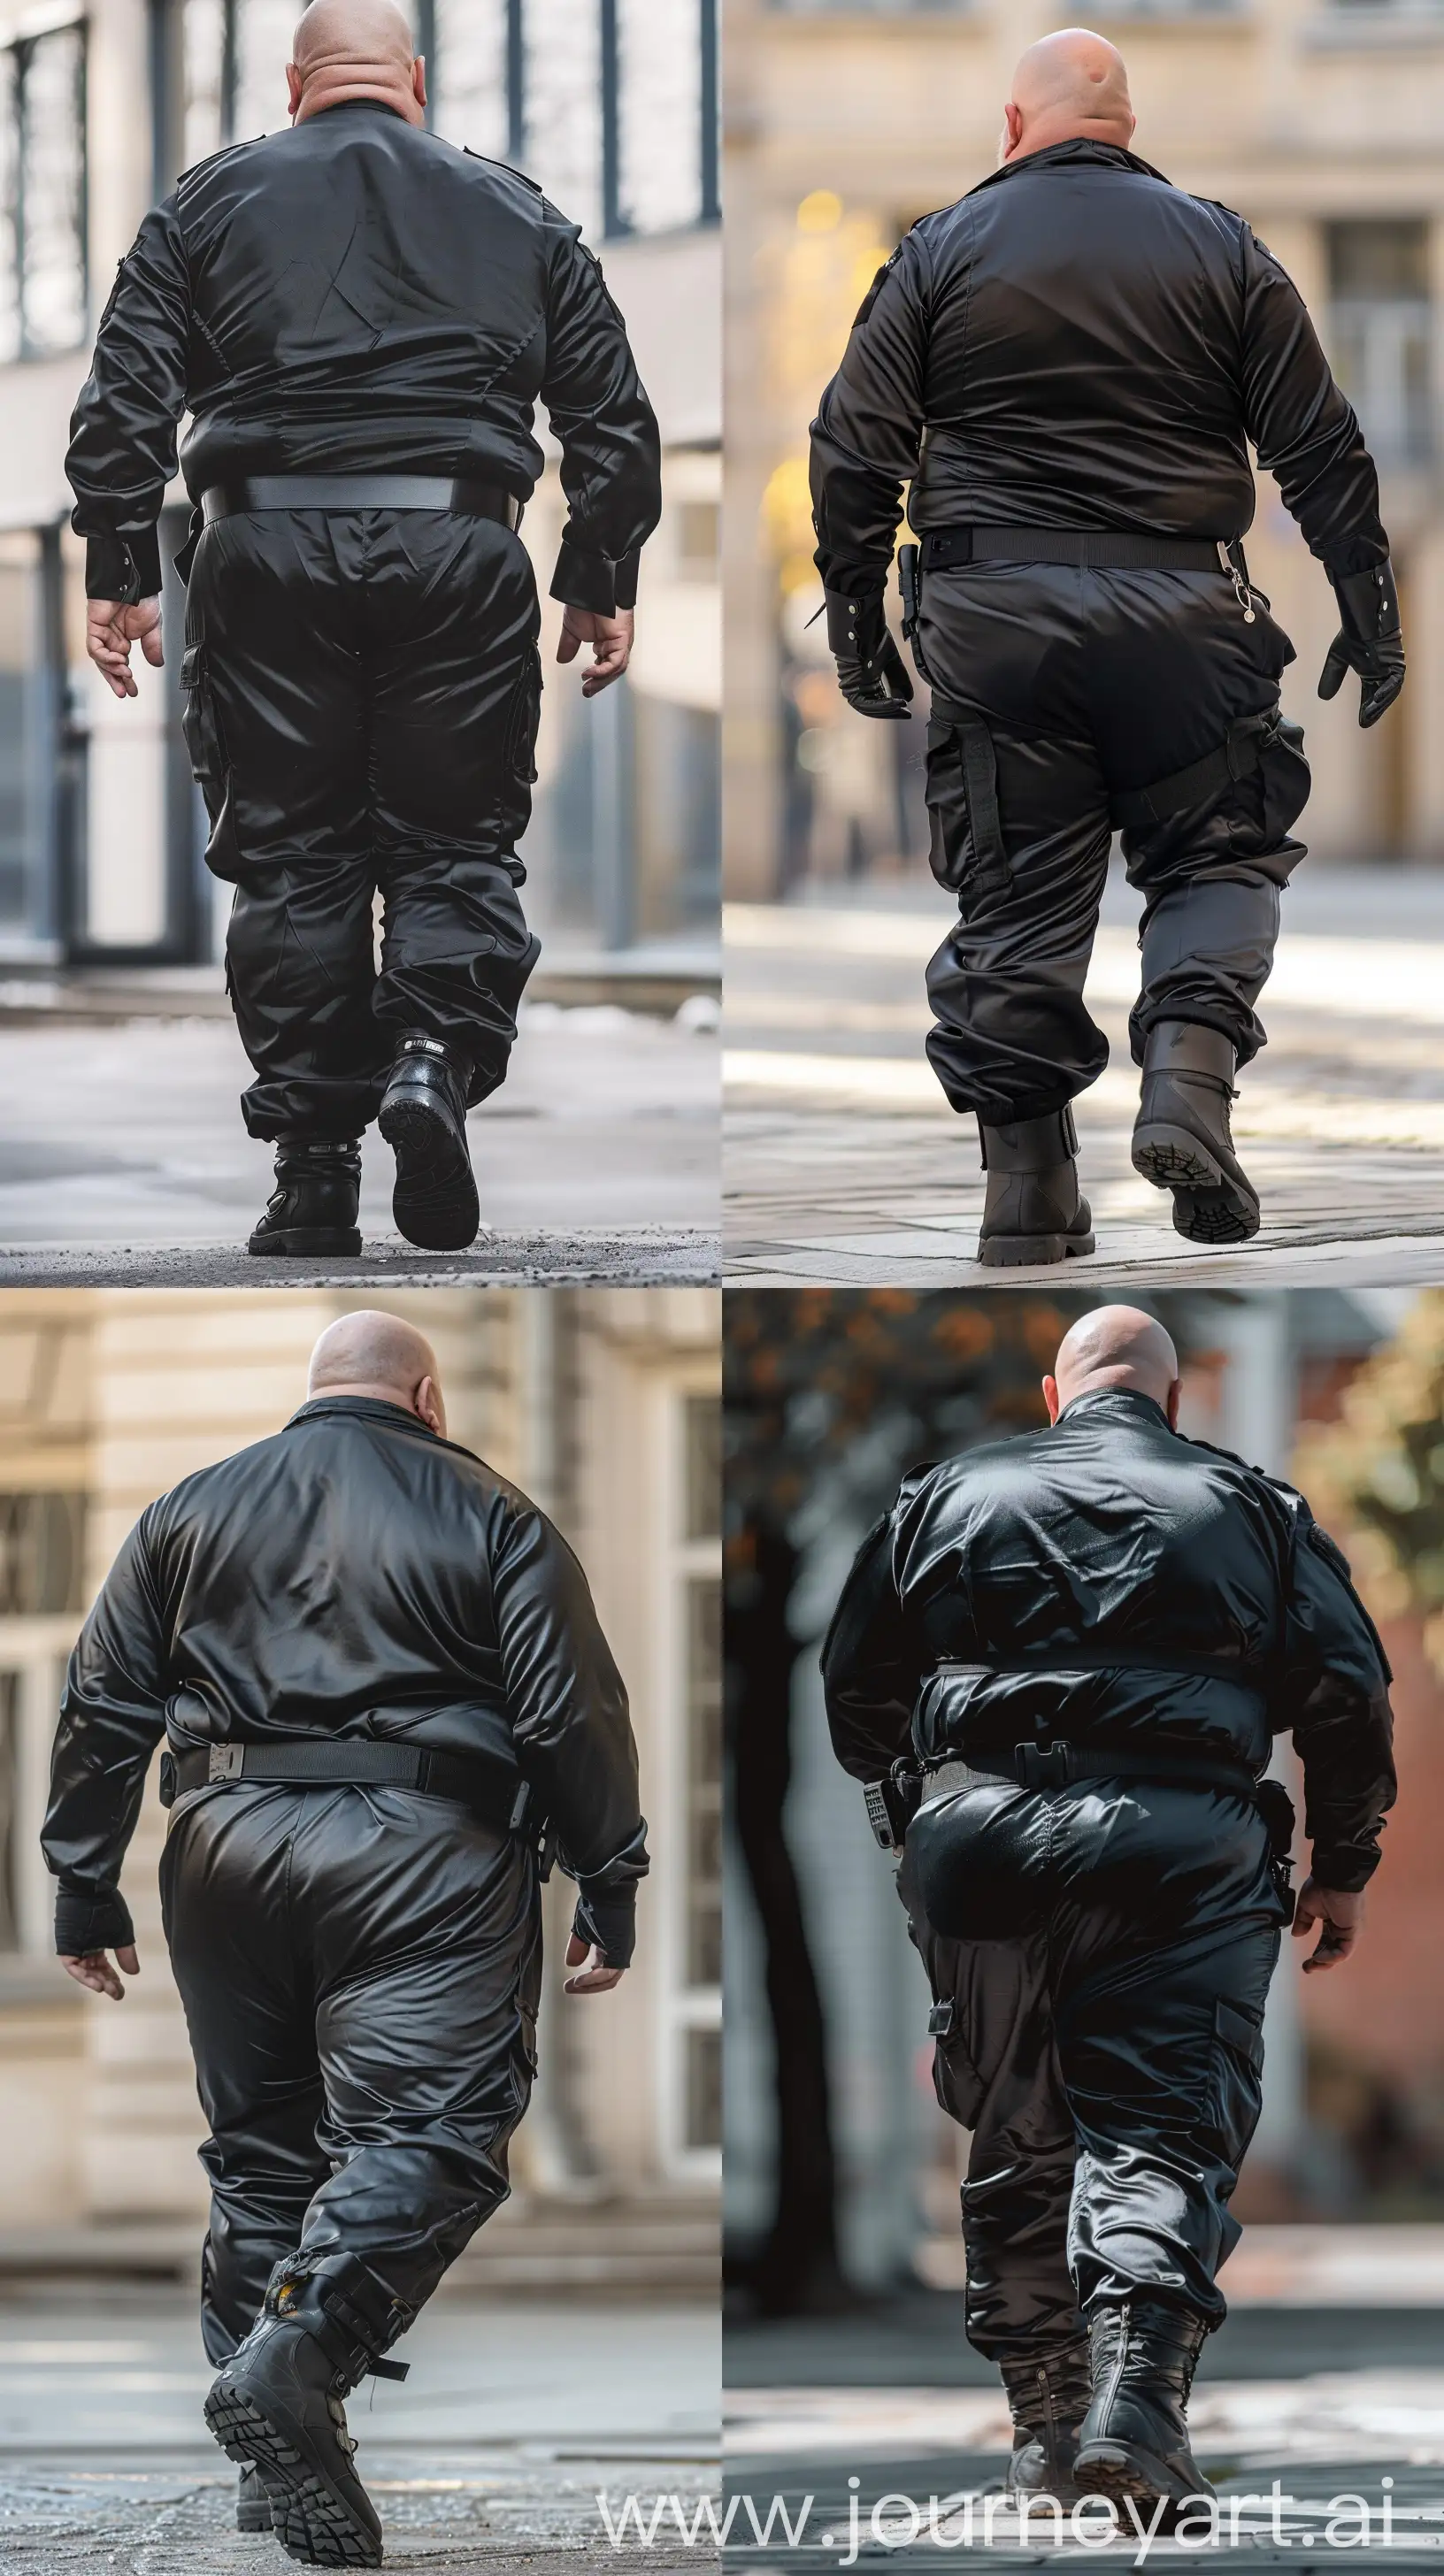 Mature-Security-Guard-in-Black-Tactical-Gear-Walking-Outdoors